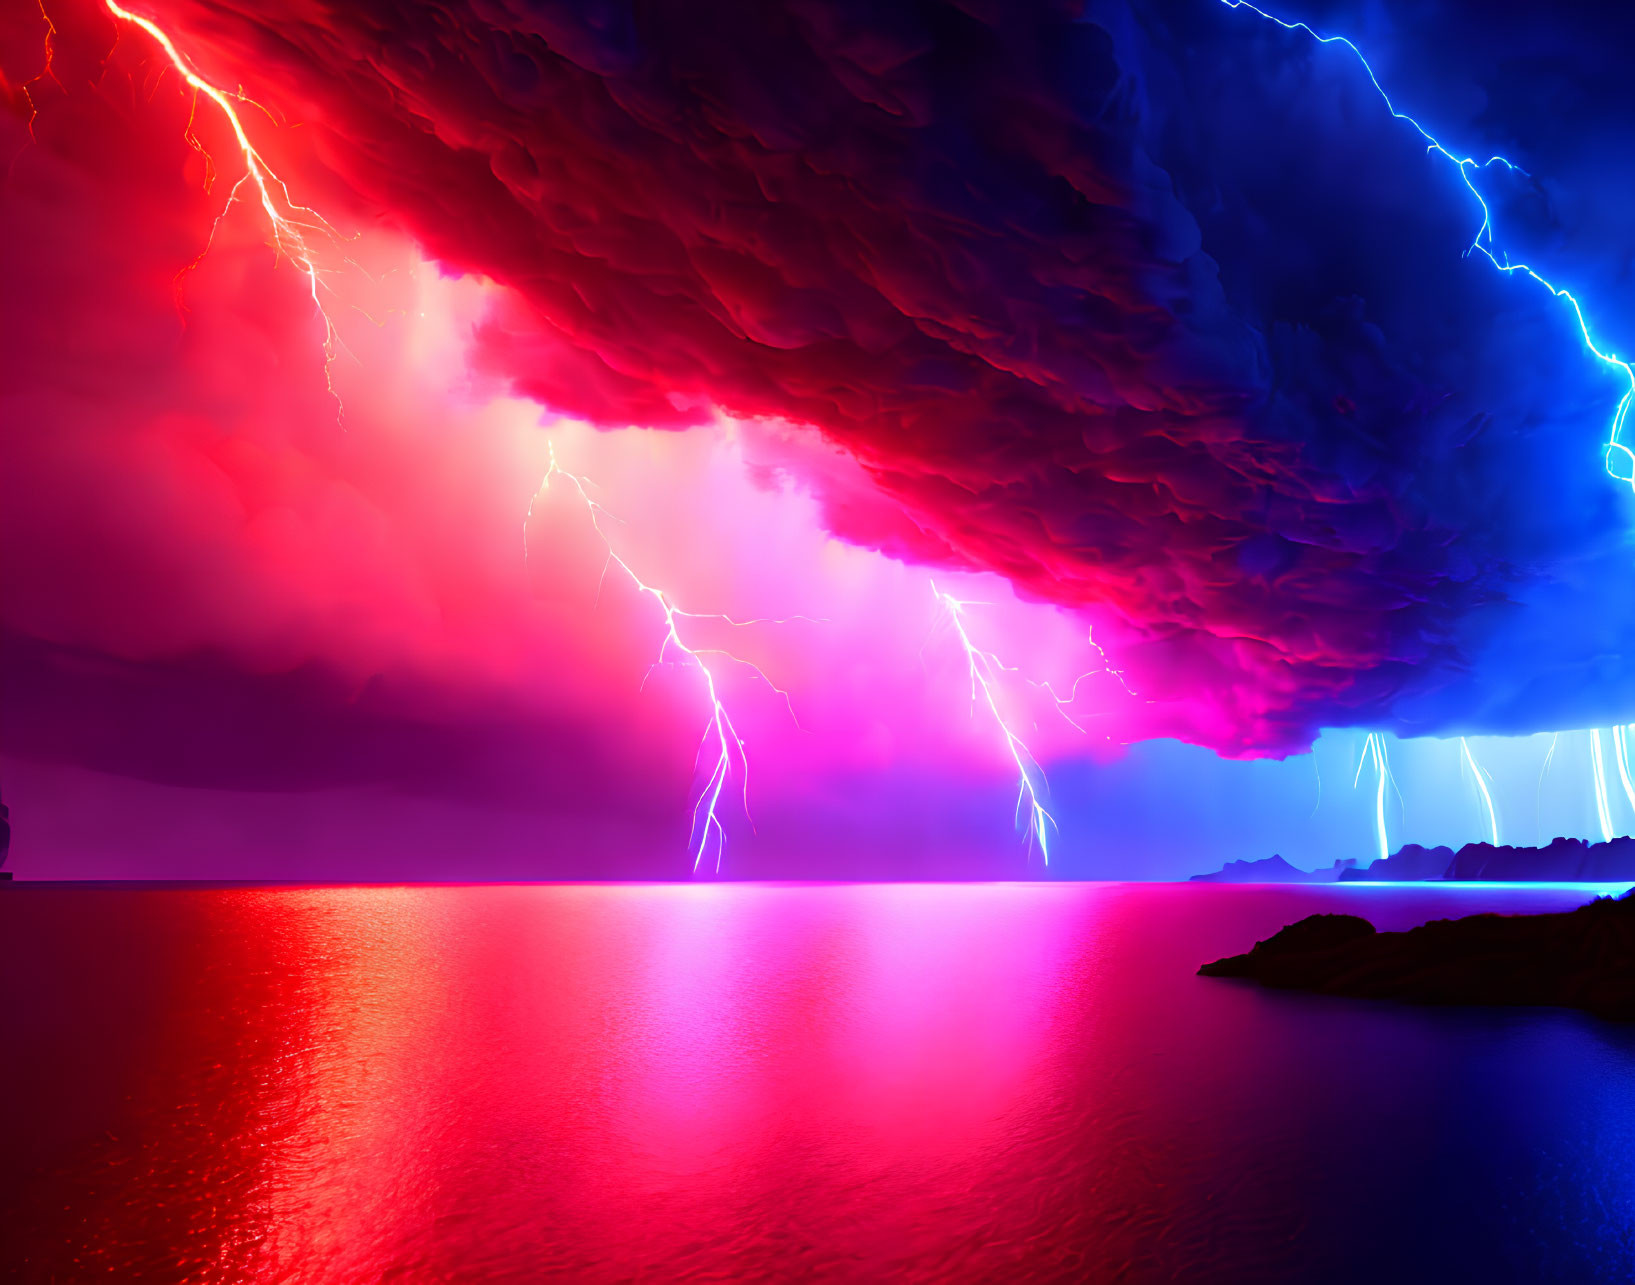 Intense lightning storm over neon red and blue sea